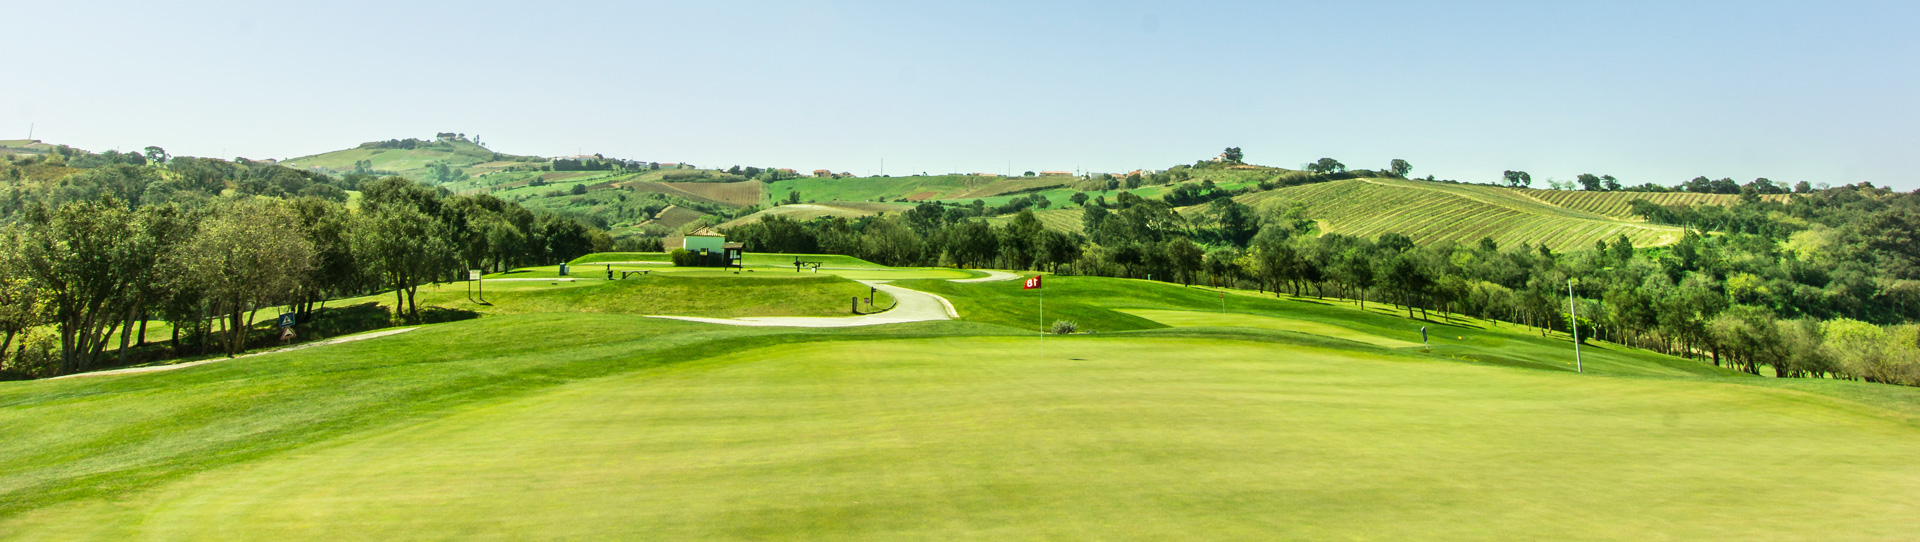 Portugal golf courses - Dolce Campo Real - Photo 2